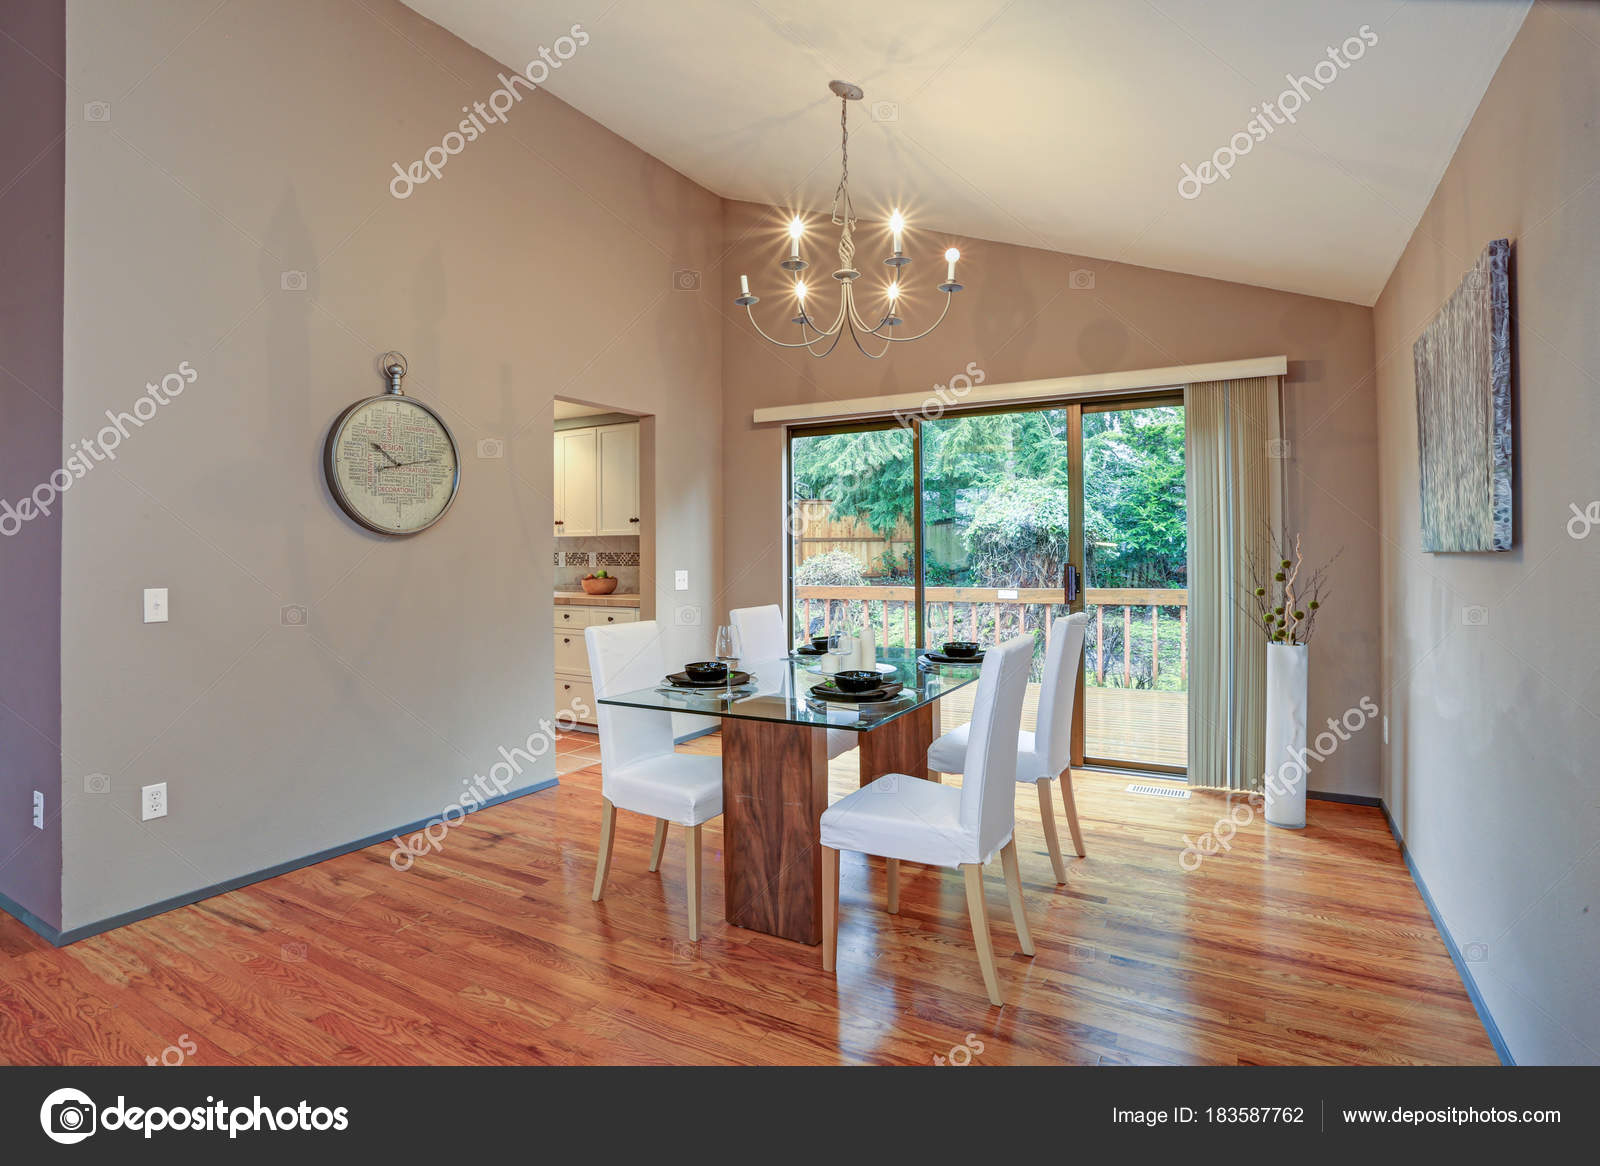 Lovely Spacious Open Floor Plan With Vaulted Ceiling Stock Photo